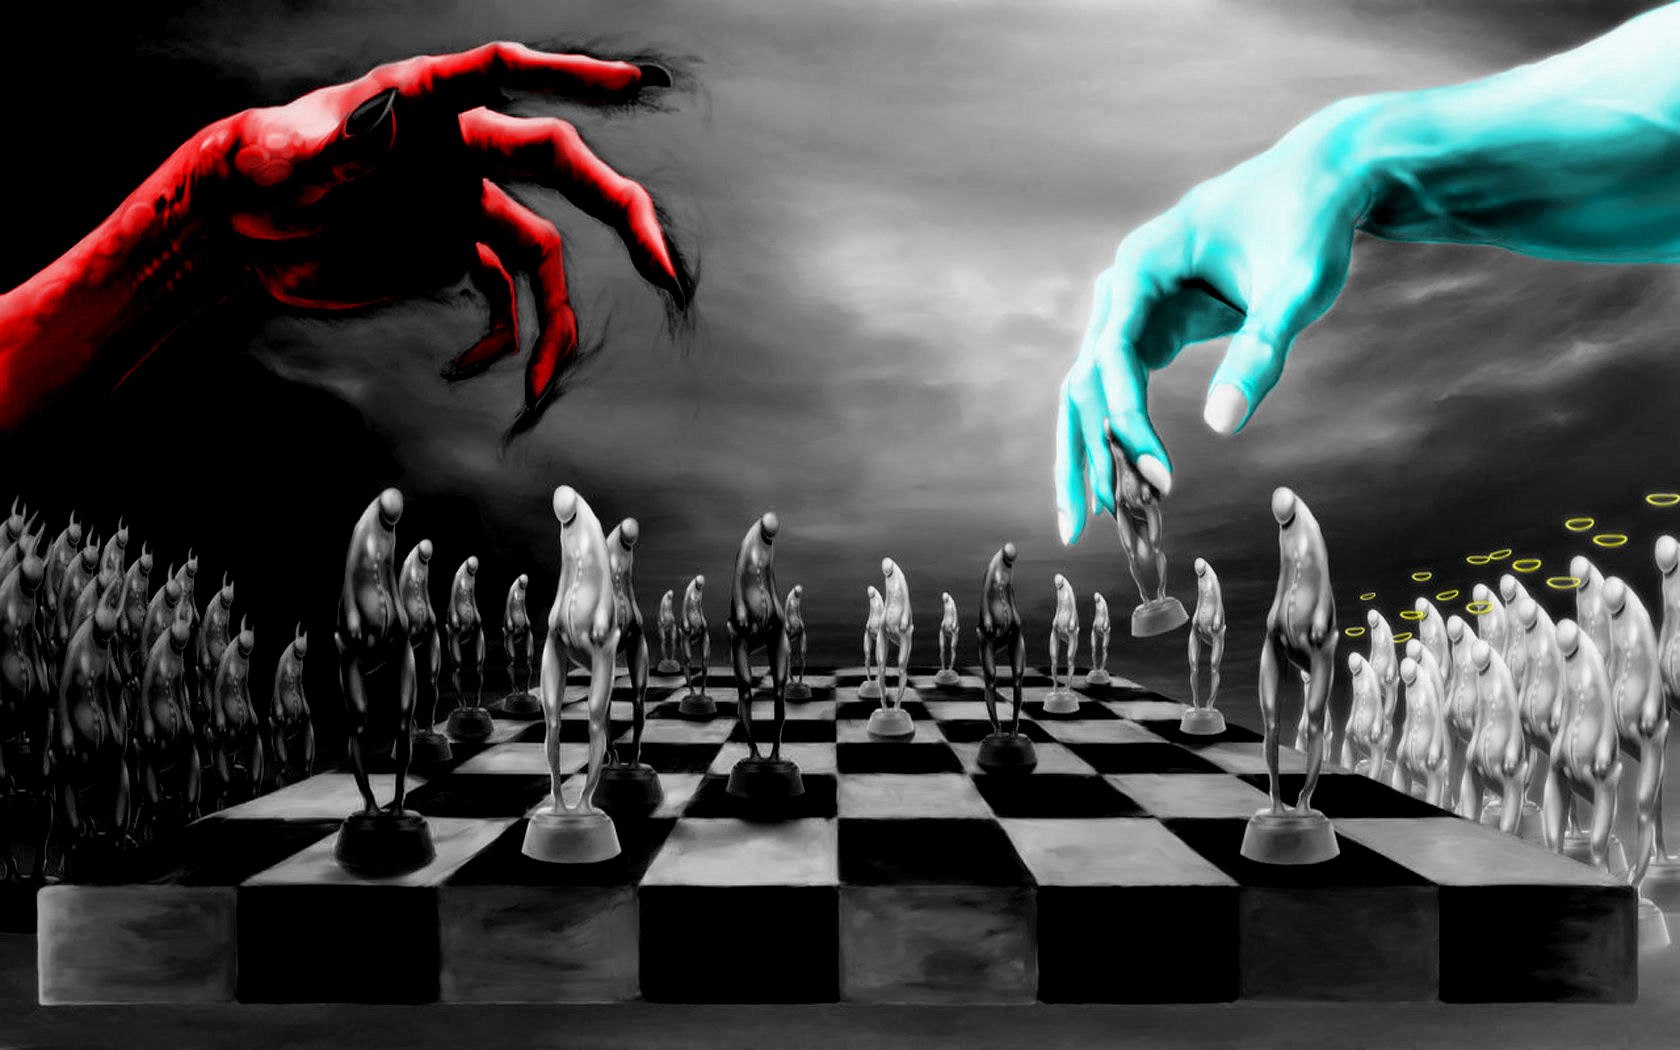 devil live wallpaper,games,chess,indoor games and sports,board game,chessboard